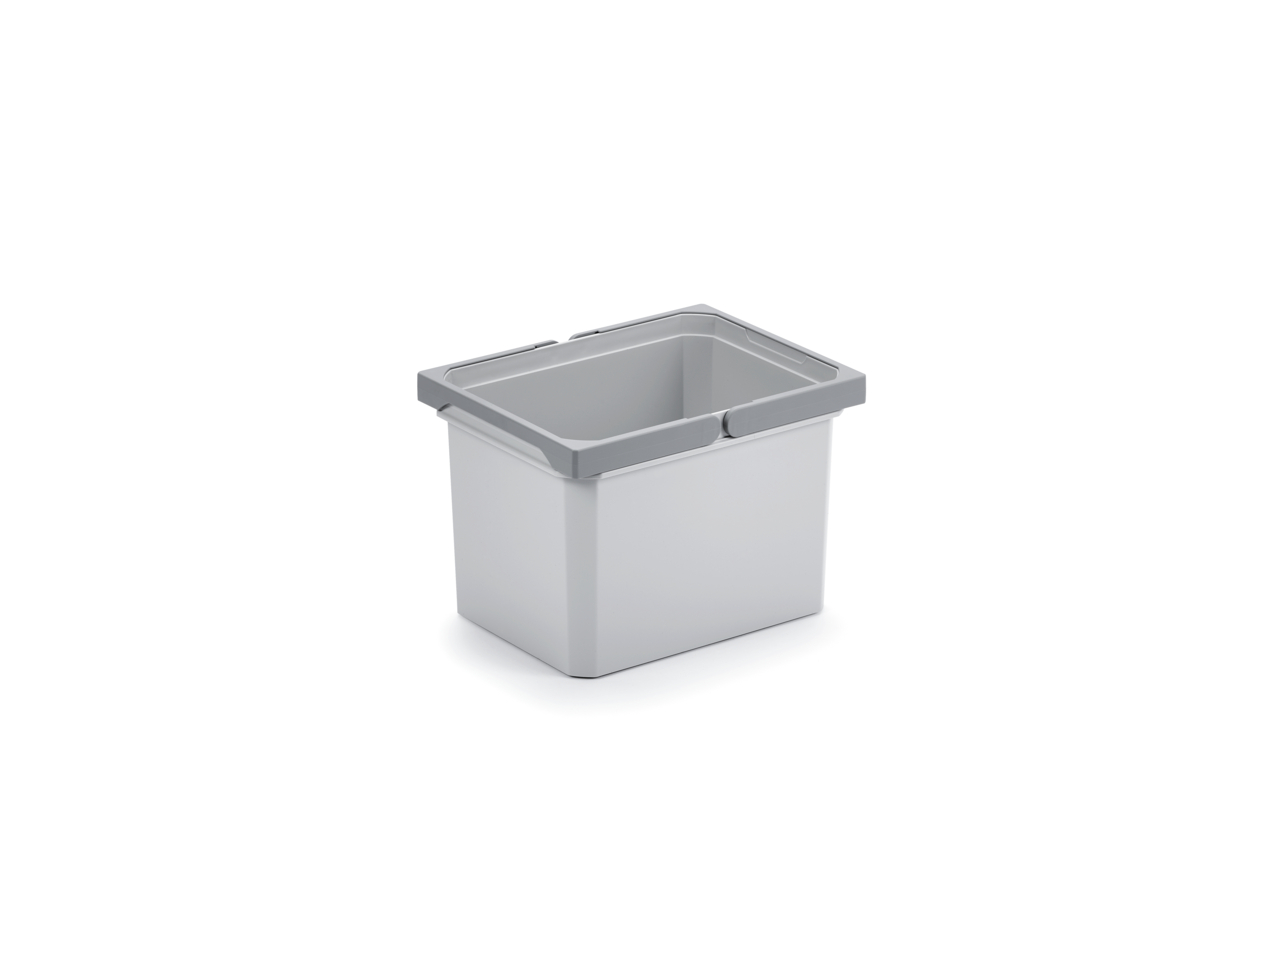  Cox® system container, light grey, 10 liters